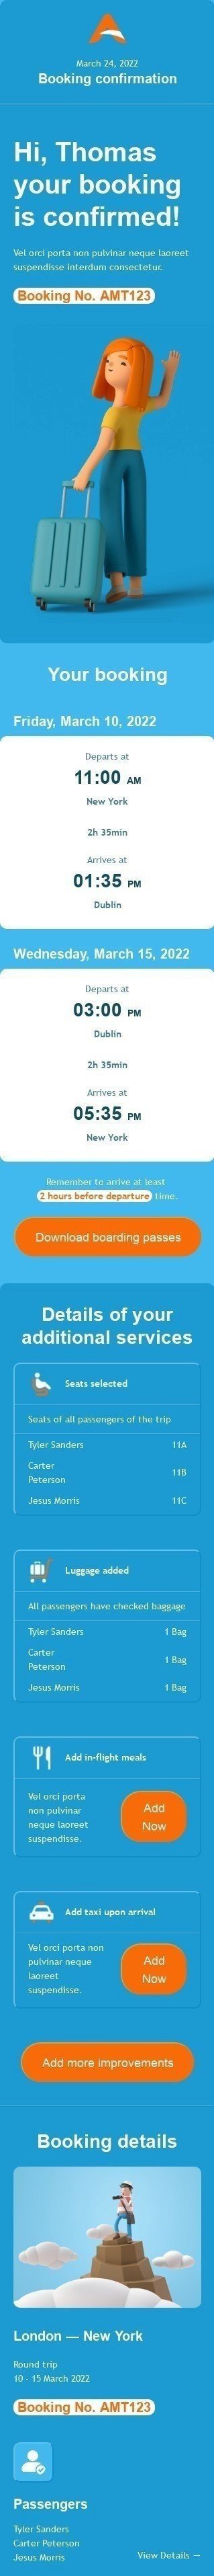 Alerts & Notifications Email Template "Booking confirmation" for Airline industry mobile view